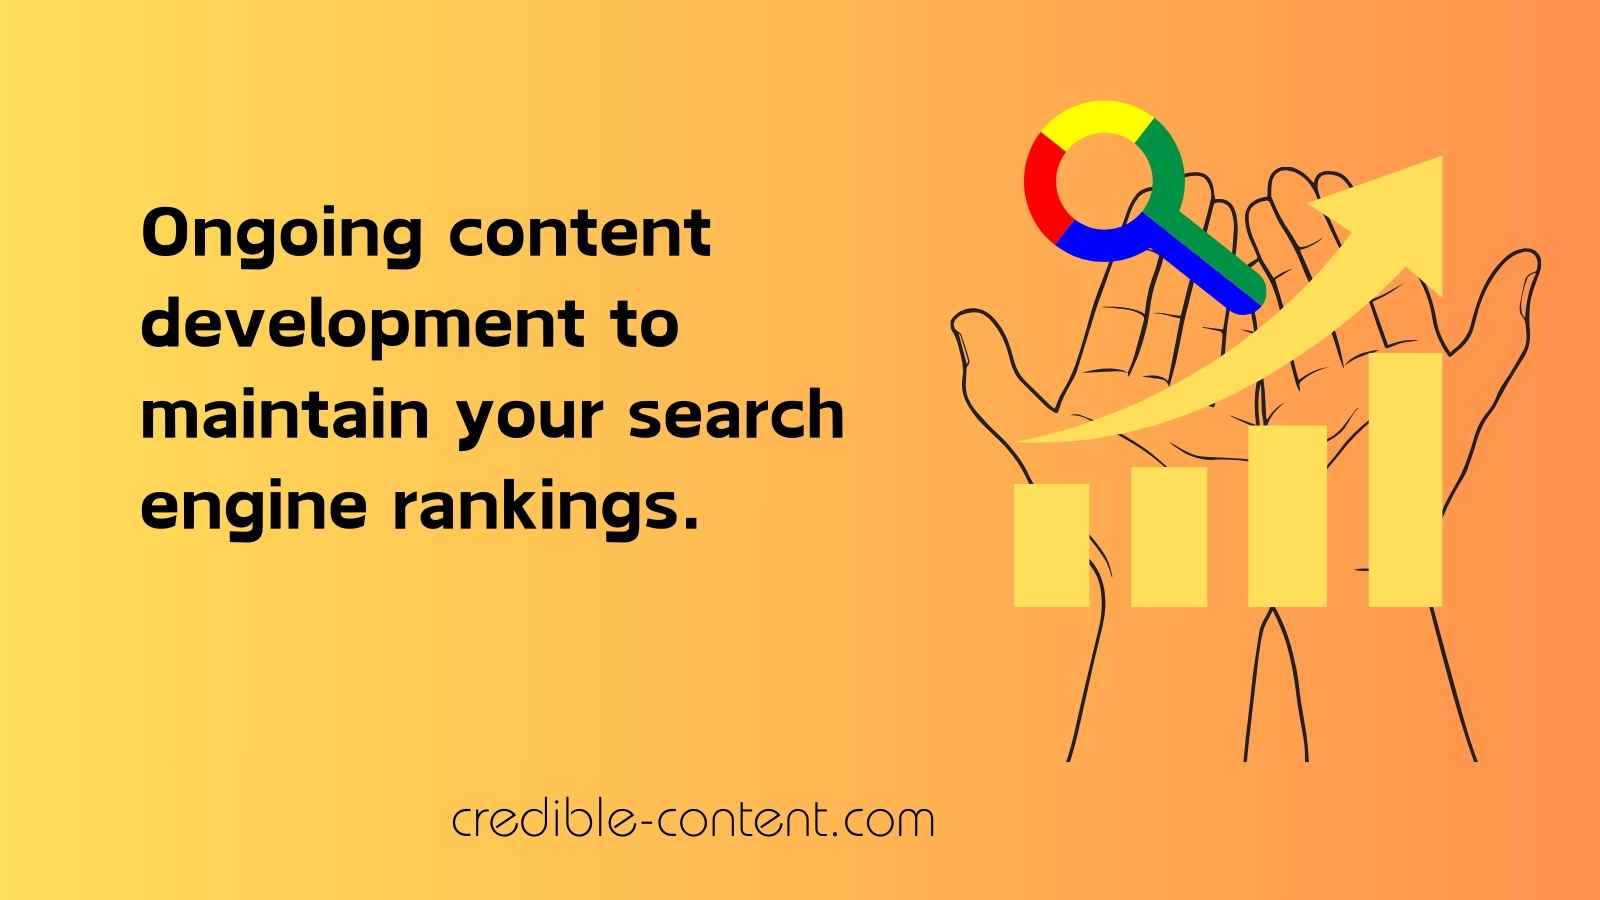 Ongoing content development to maintain your search engine rankings